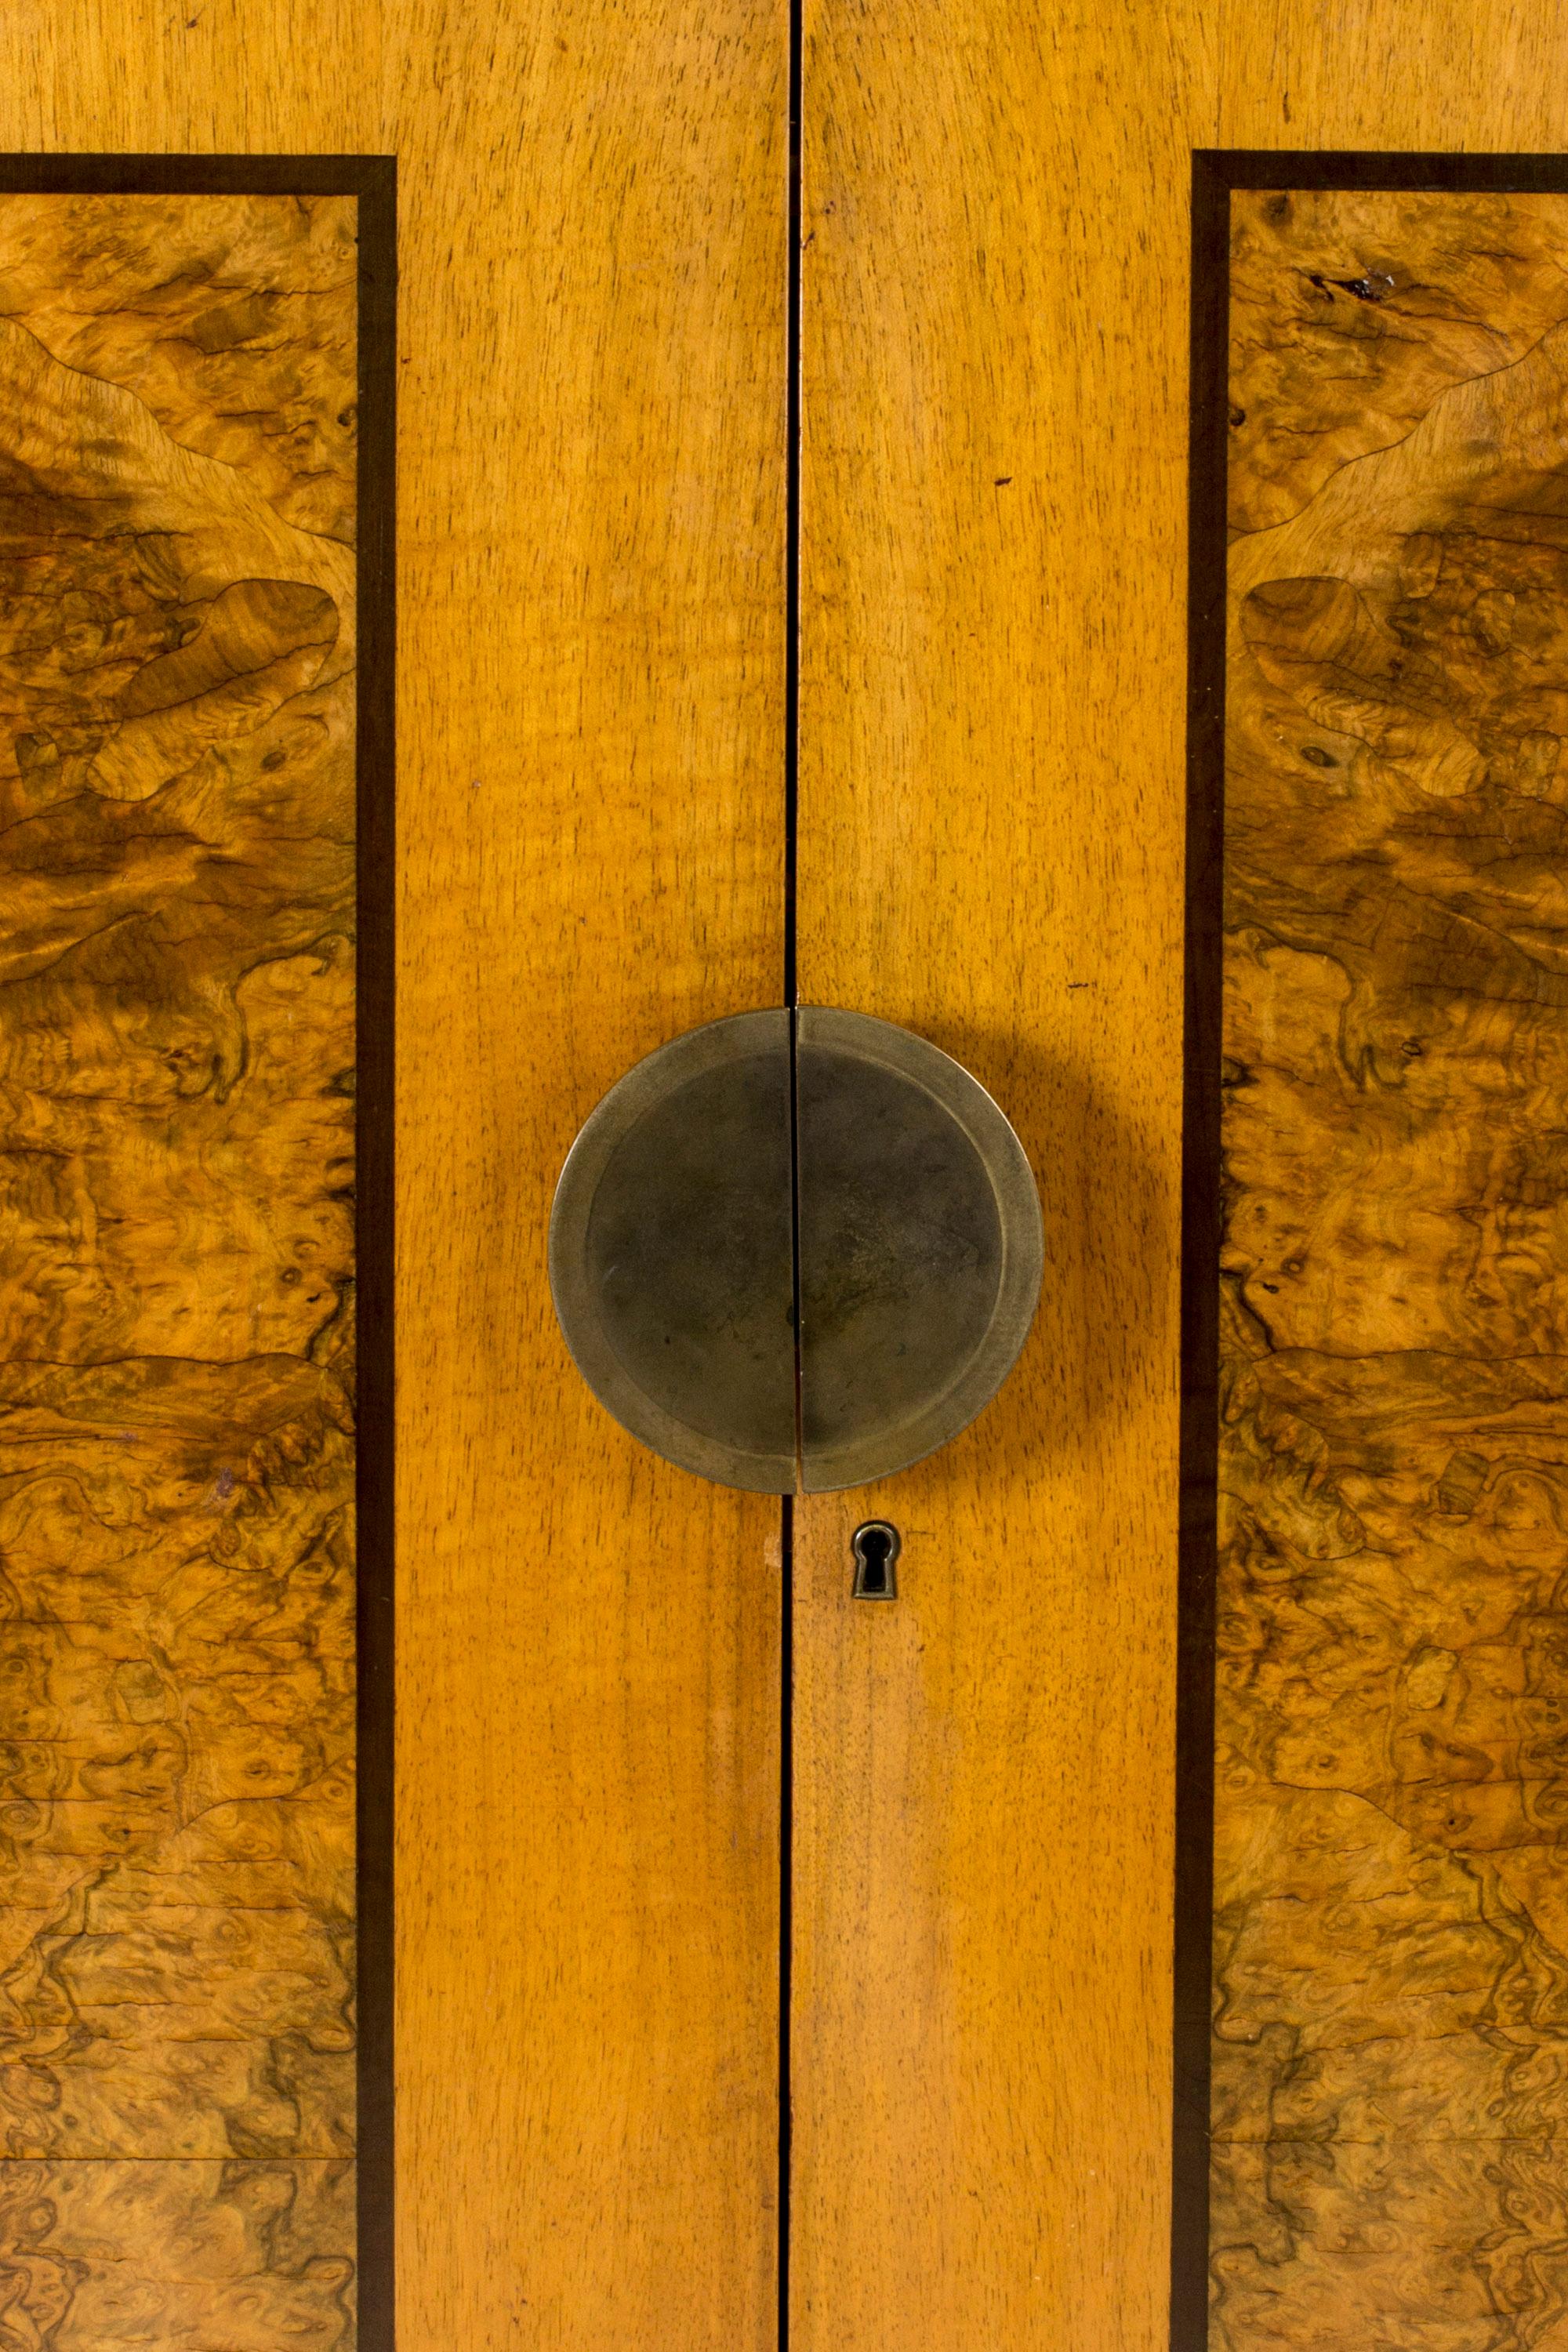 Stately functionalist cabinet by Erik Chambert, made from birch with birch root inlays. Large round brass door handle that splits seamlessly when the cabinet is opened. Elegant inside made from darker wood with contrasting drawer handles. A mirror